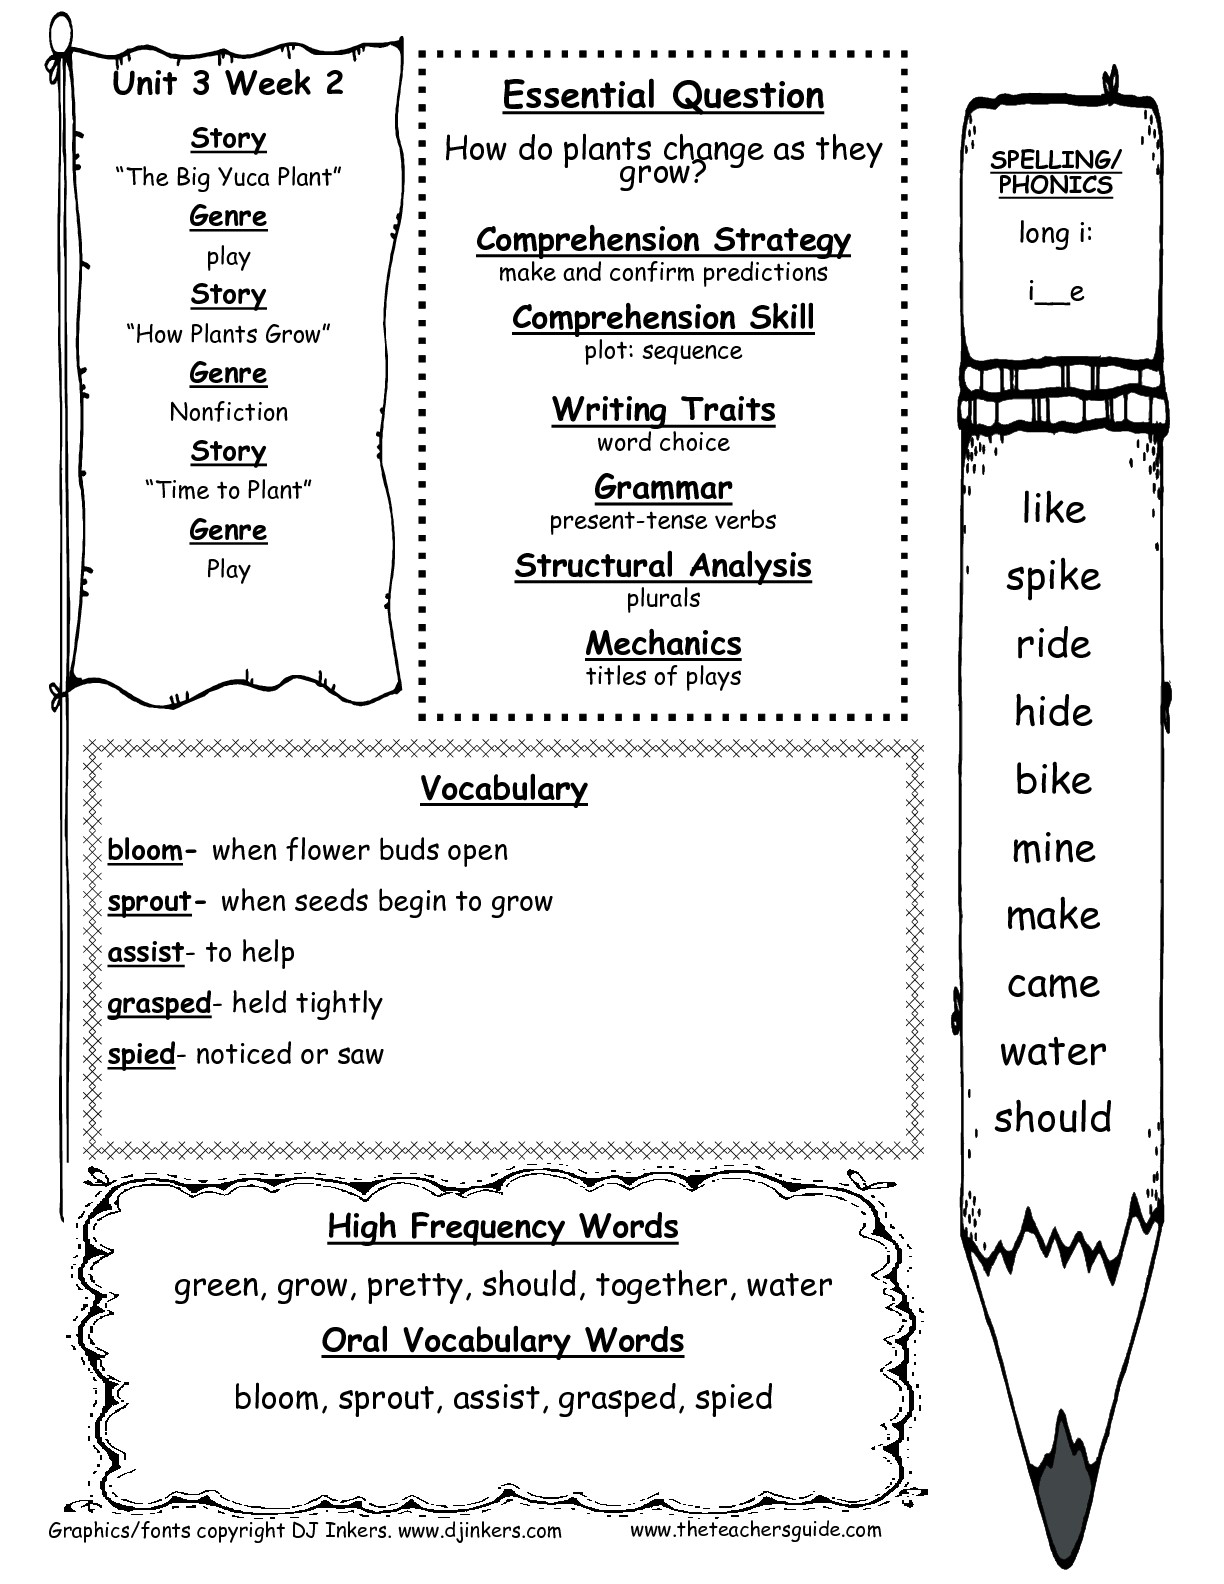 The Teachers Guide-Free Worksheets Image